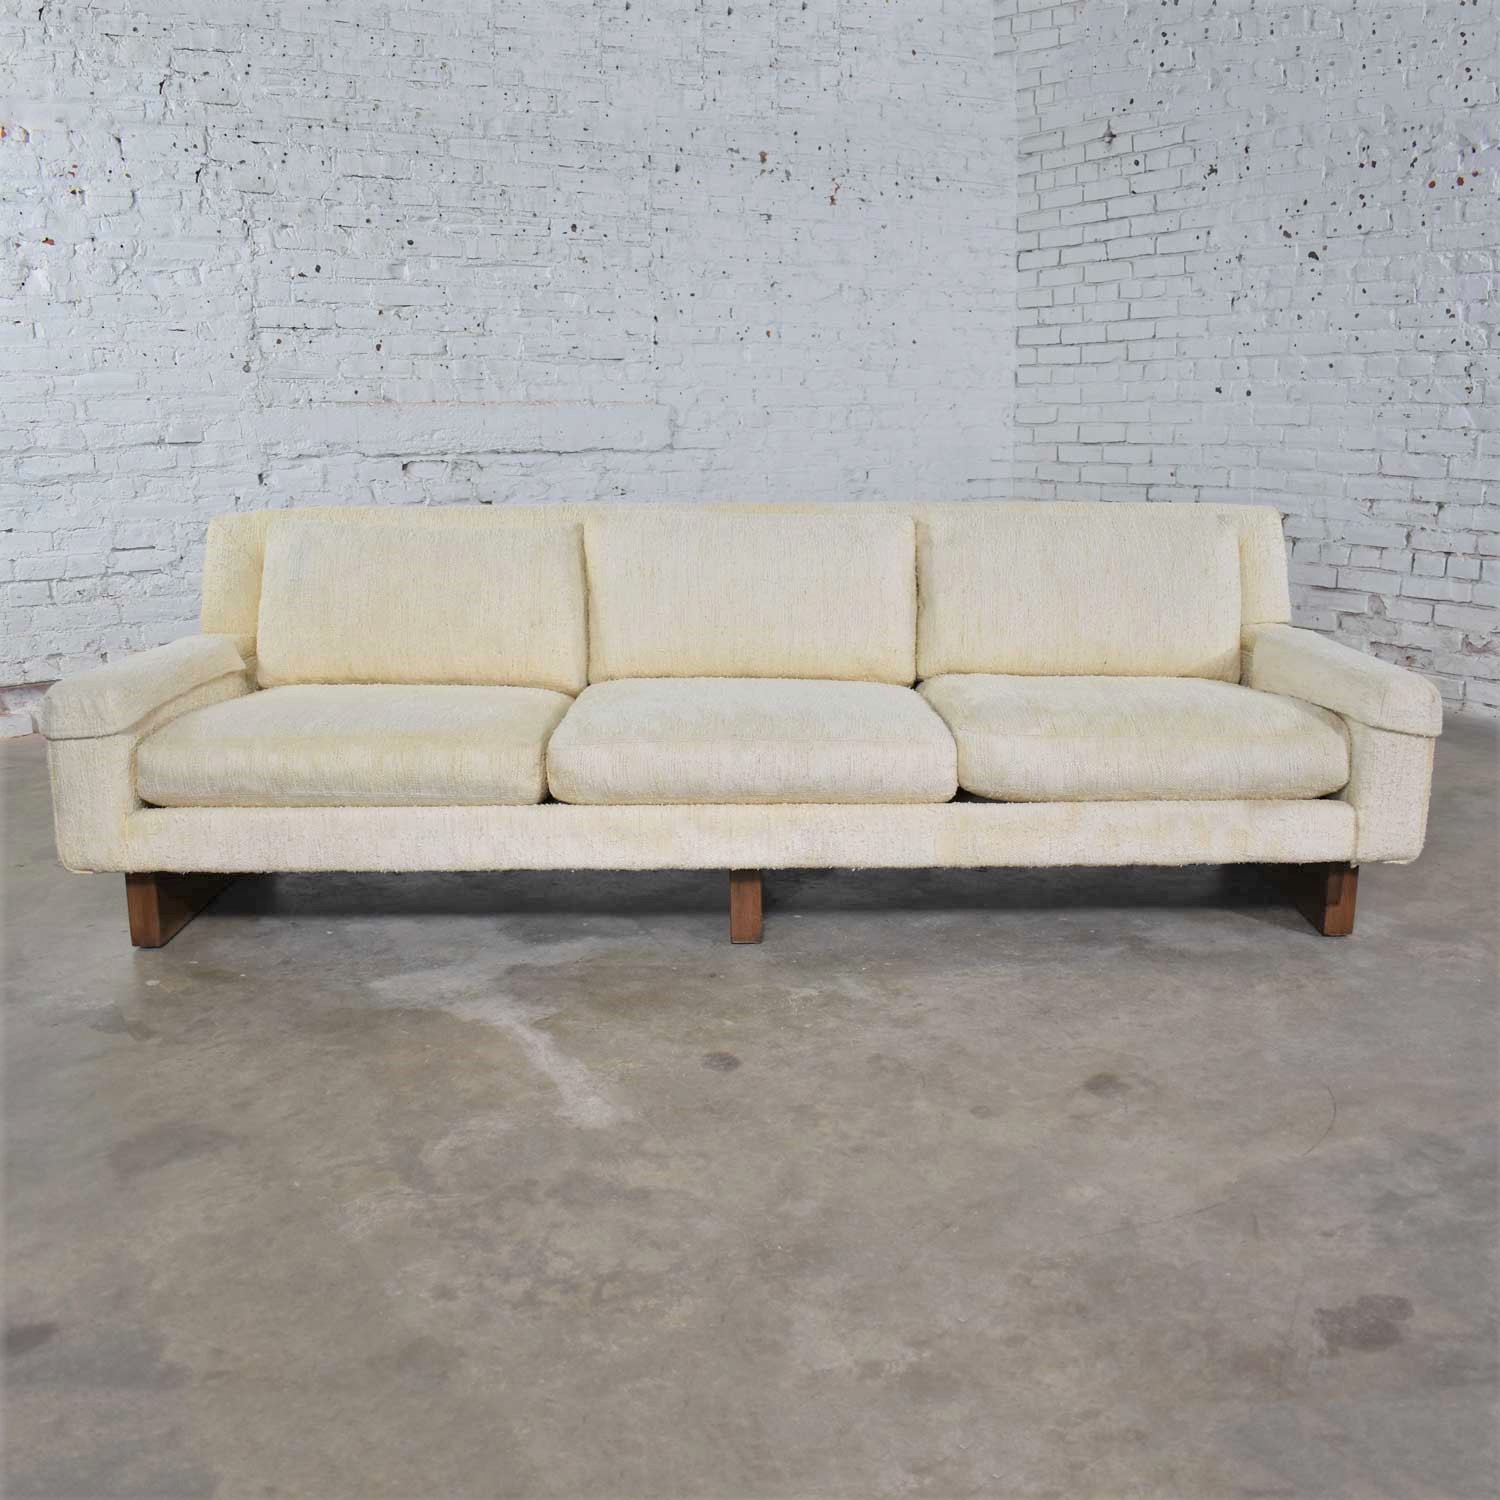 Vintage Mid Century Modern Lawson Style White Sofa by Flair Division for Bernhardt